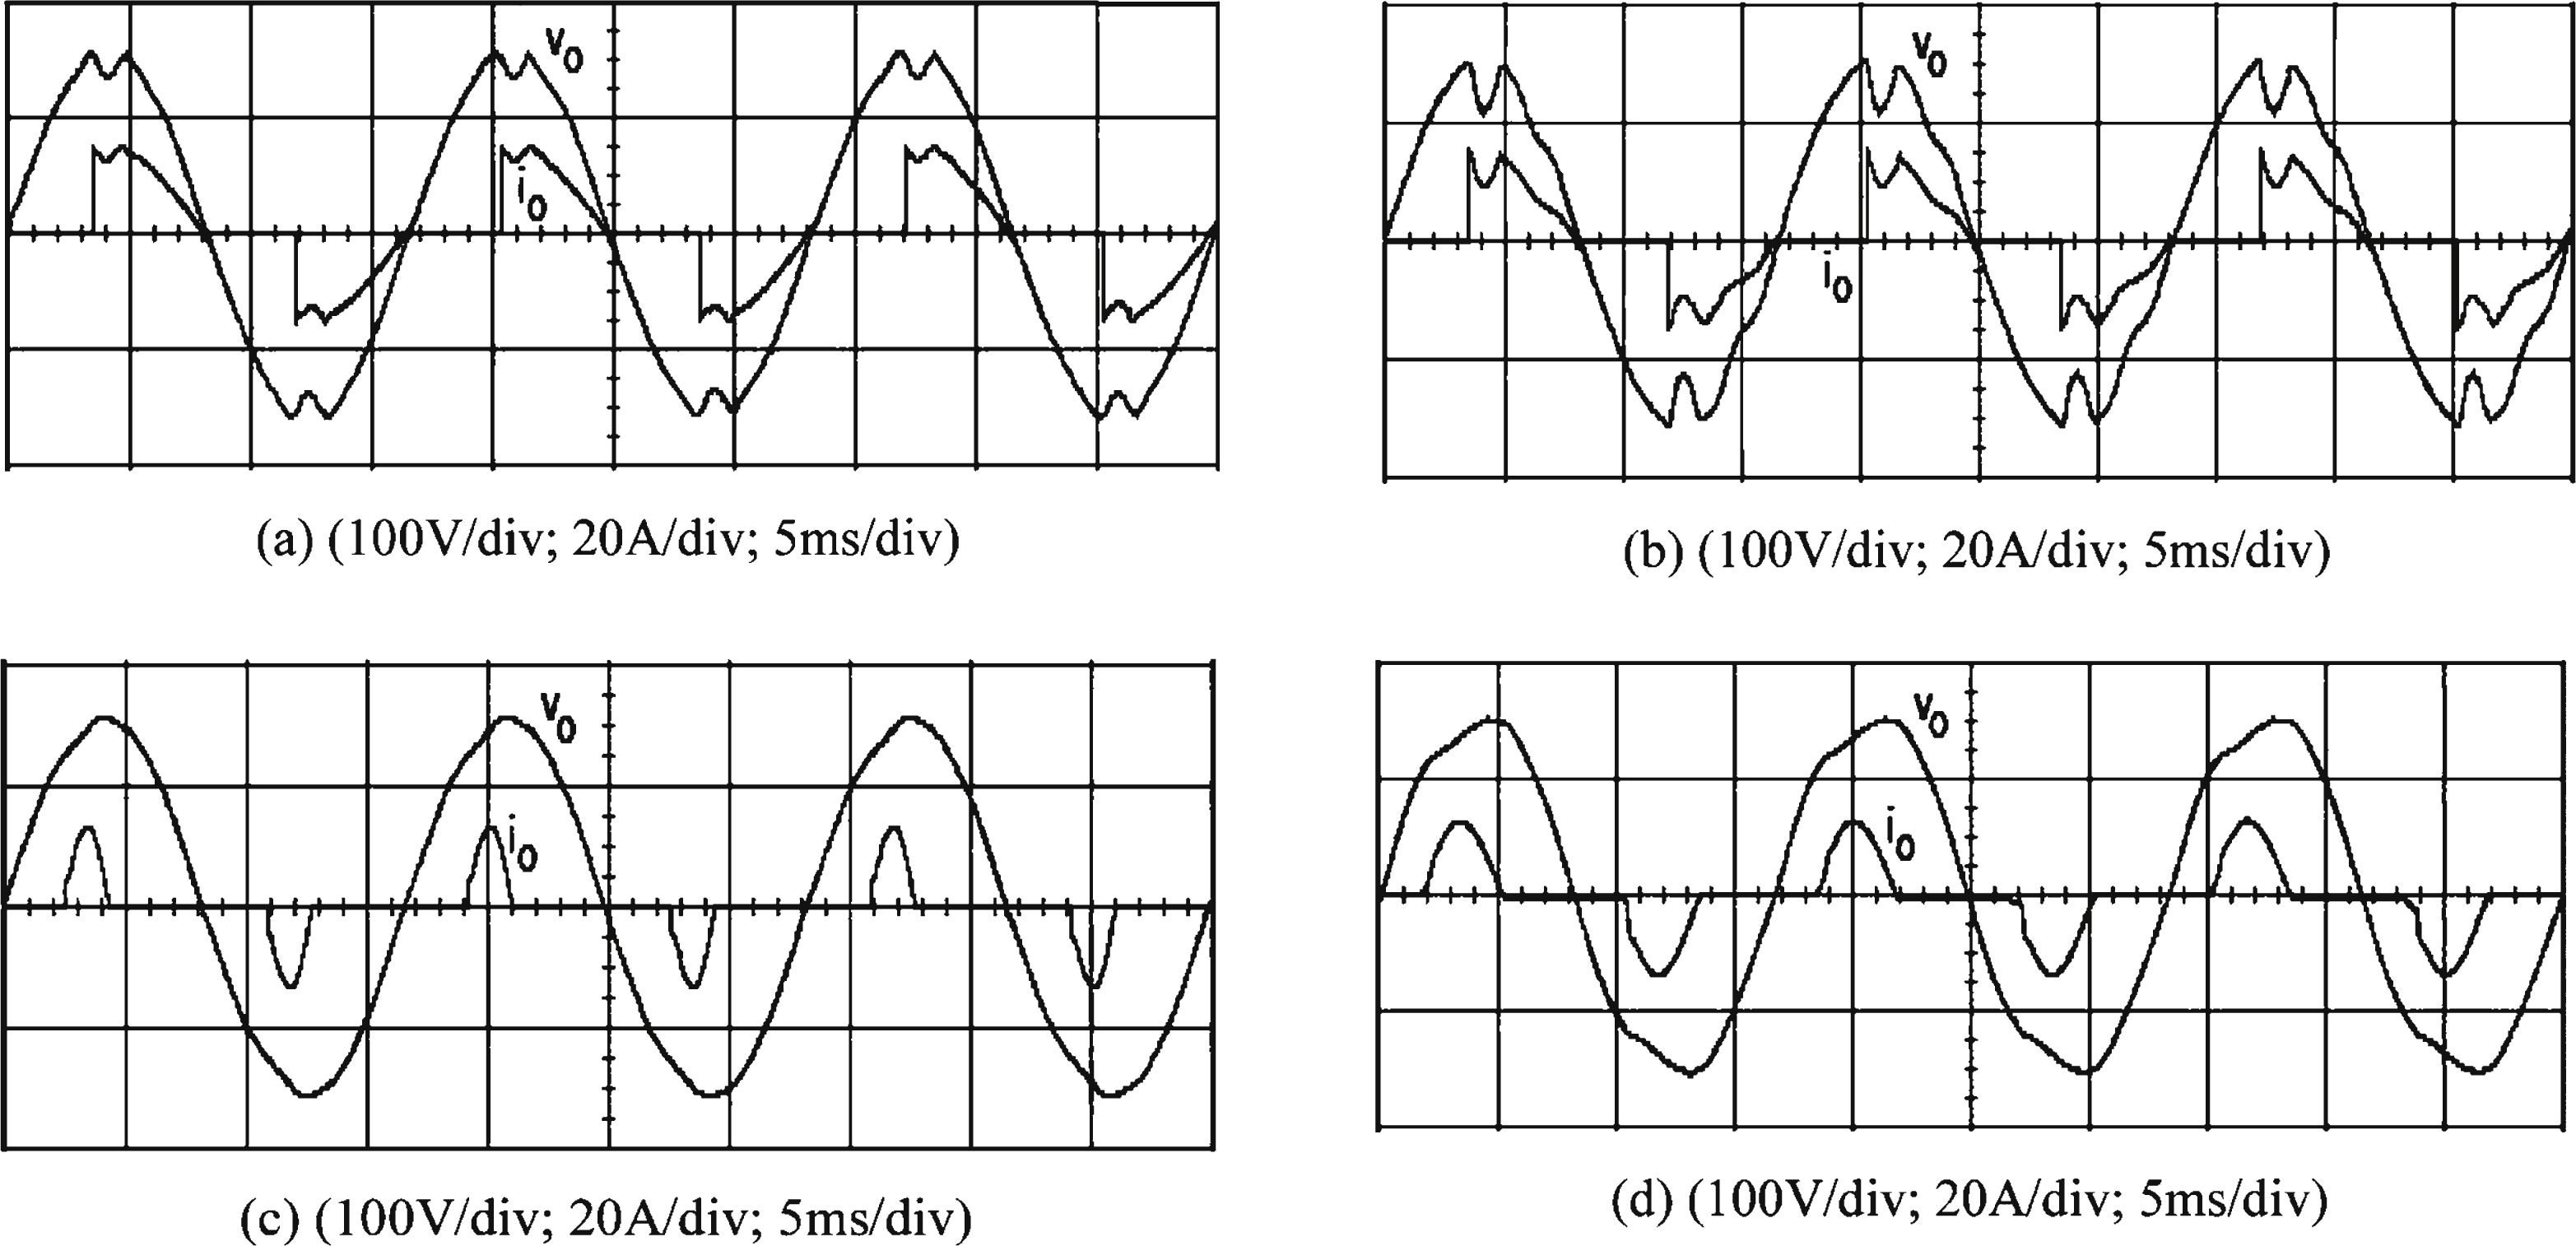 Experimental waveforms of the output voltage and the load current under (a) TRIAC load with the proposed control. (b) TRIAC load with the classic SMC. (c) Rectifier load with the proposed control. (d) Rectifier load with the classic SMC.